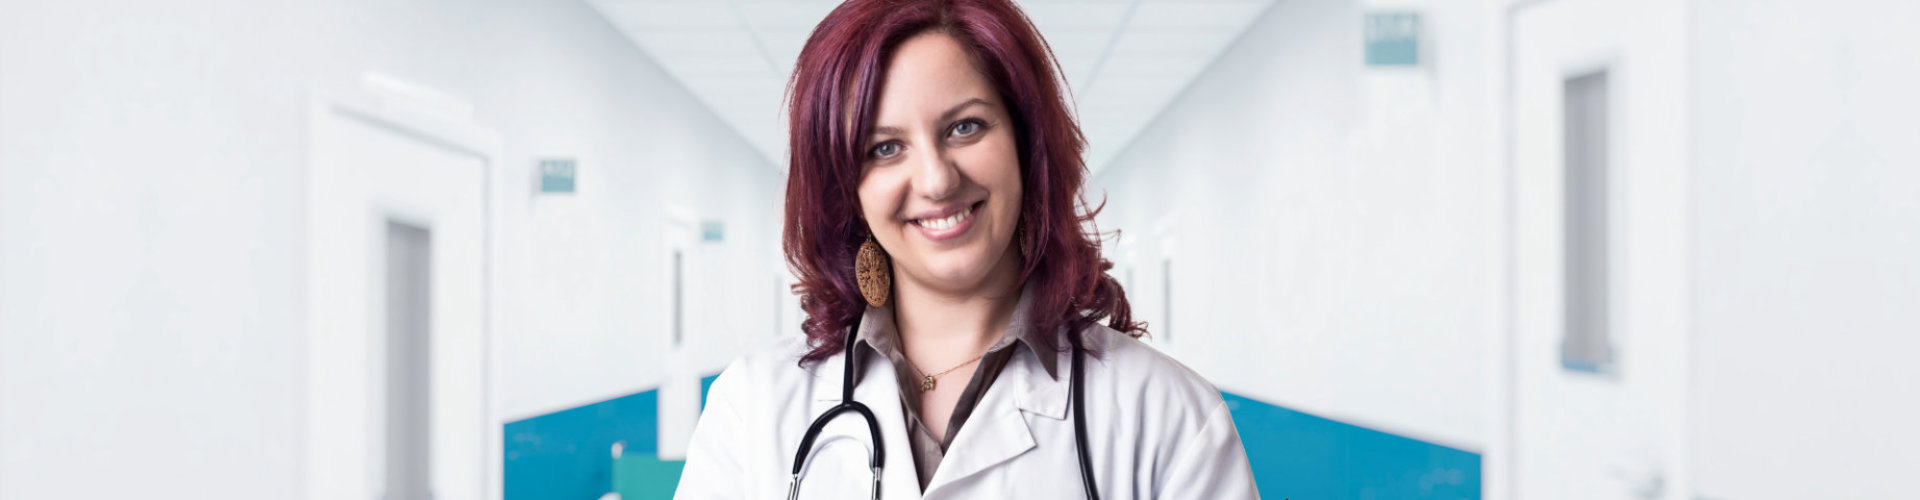 female doctor standing at a window in clinic wearing stethoscope smiling